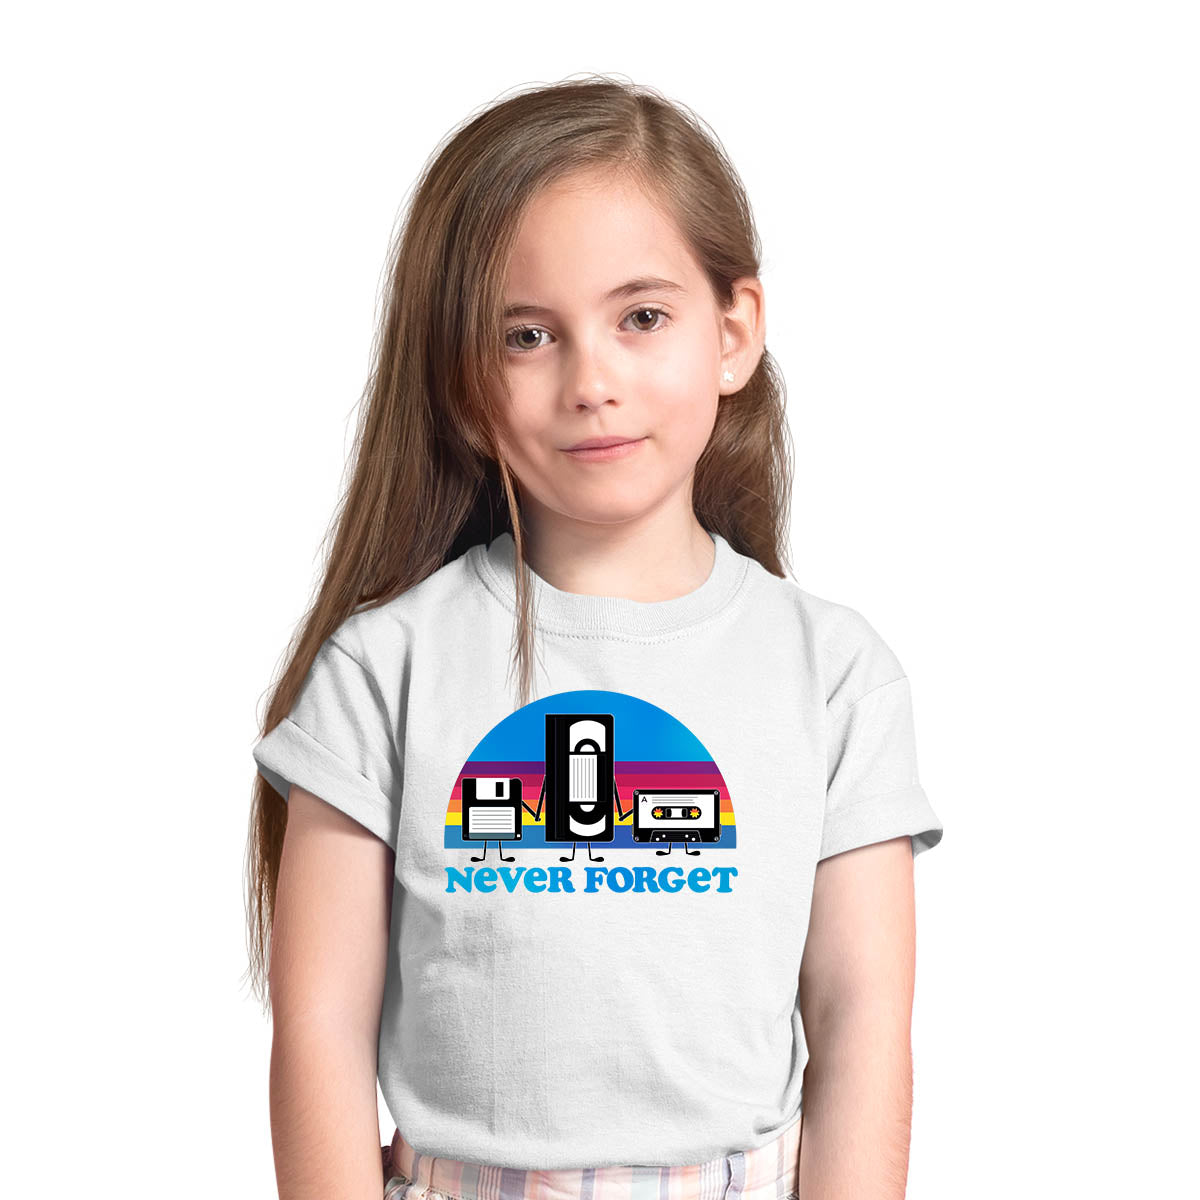 Vintage Never Forget Shirt Funny Retro Floppy Disk VHS Tee White T-shirt for Kids